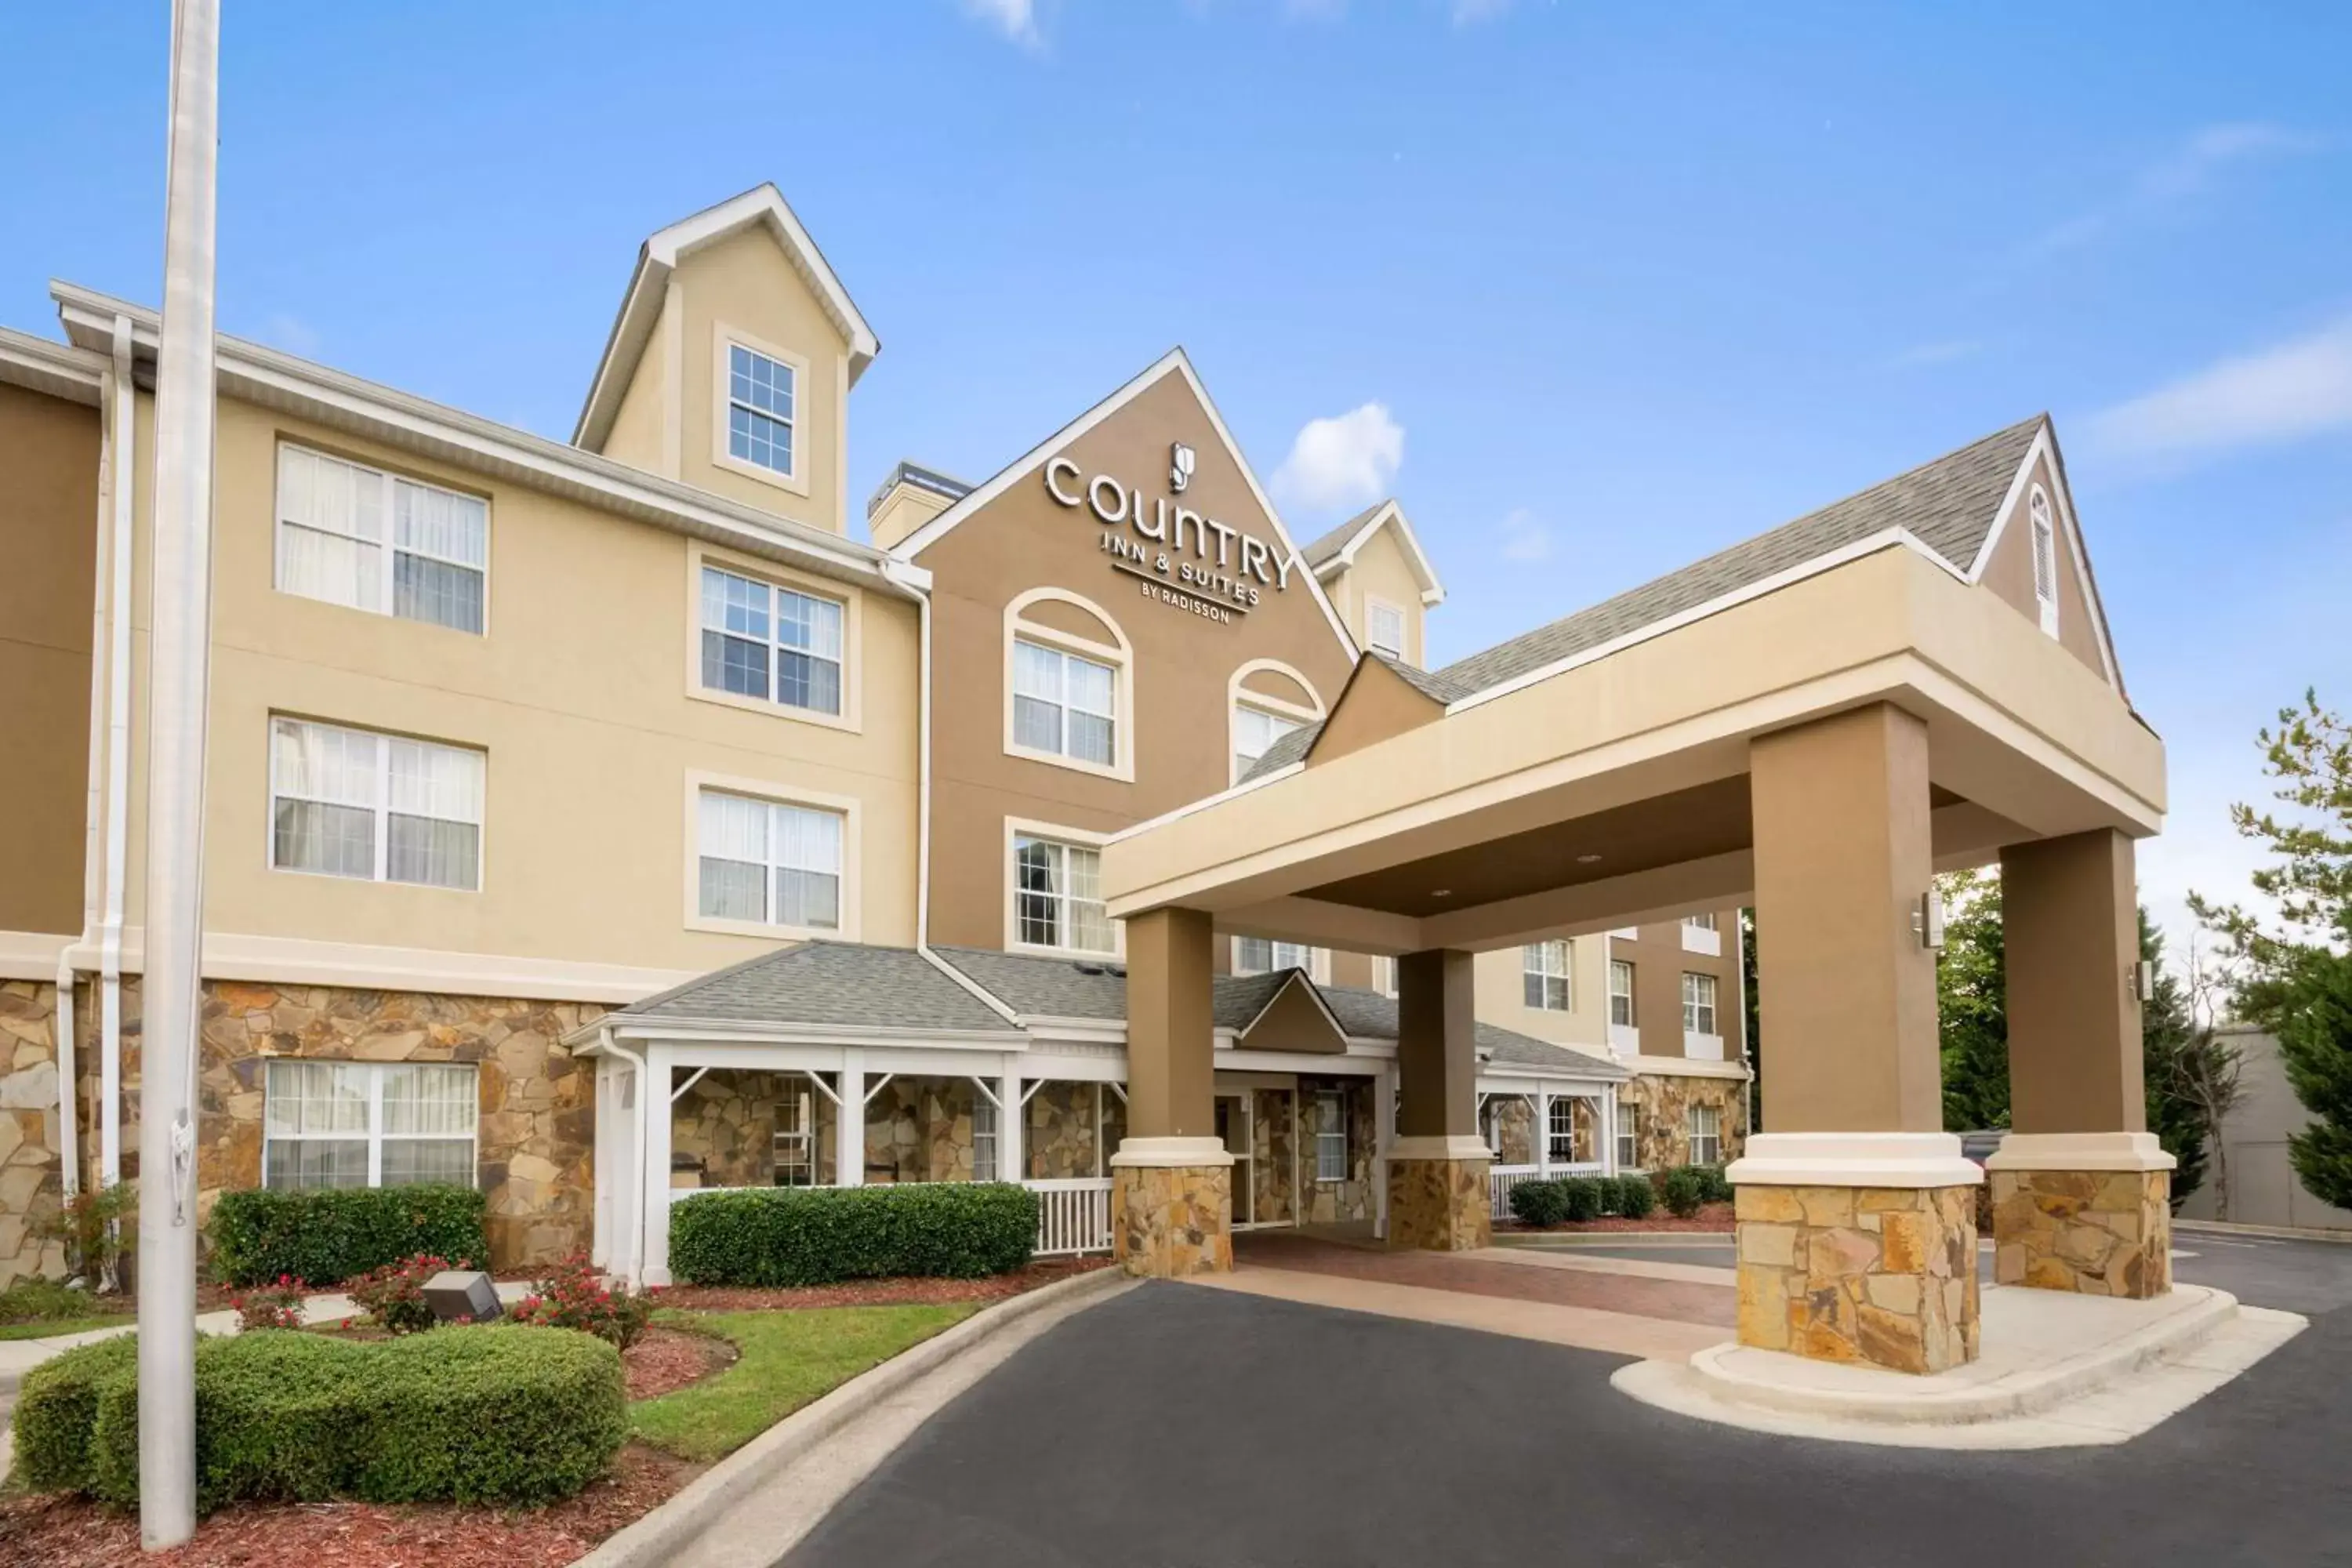 Property building in Country Inn & Suites by Radisson, Norcross, GA